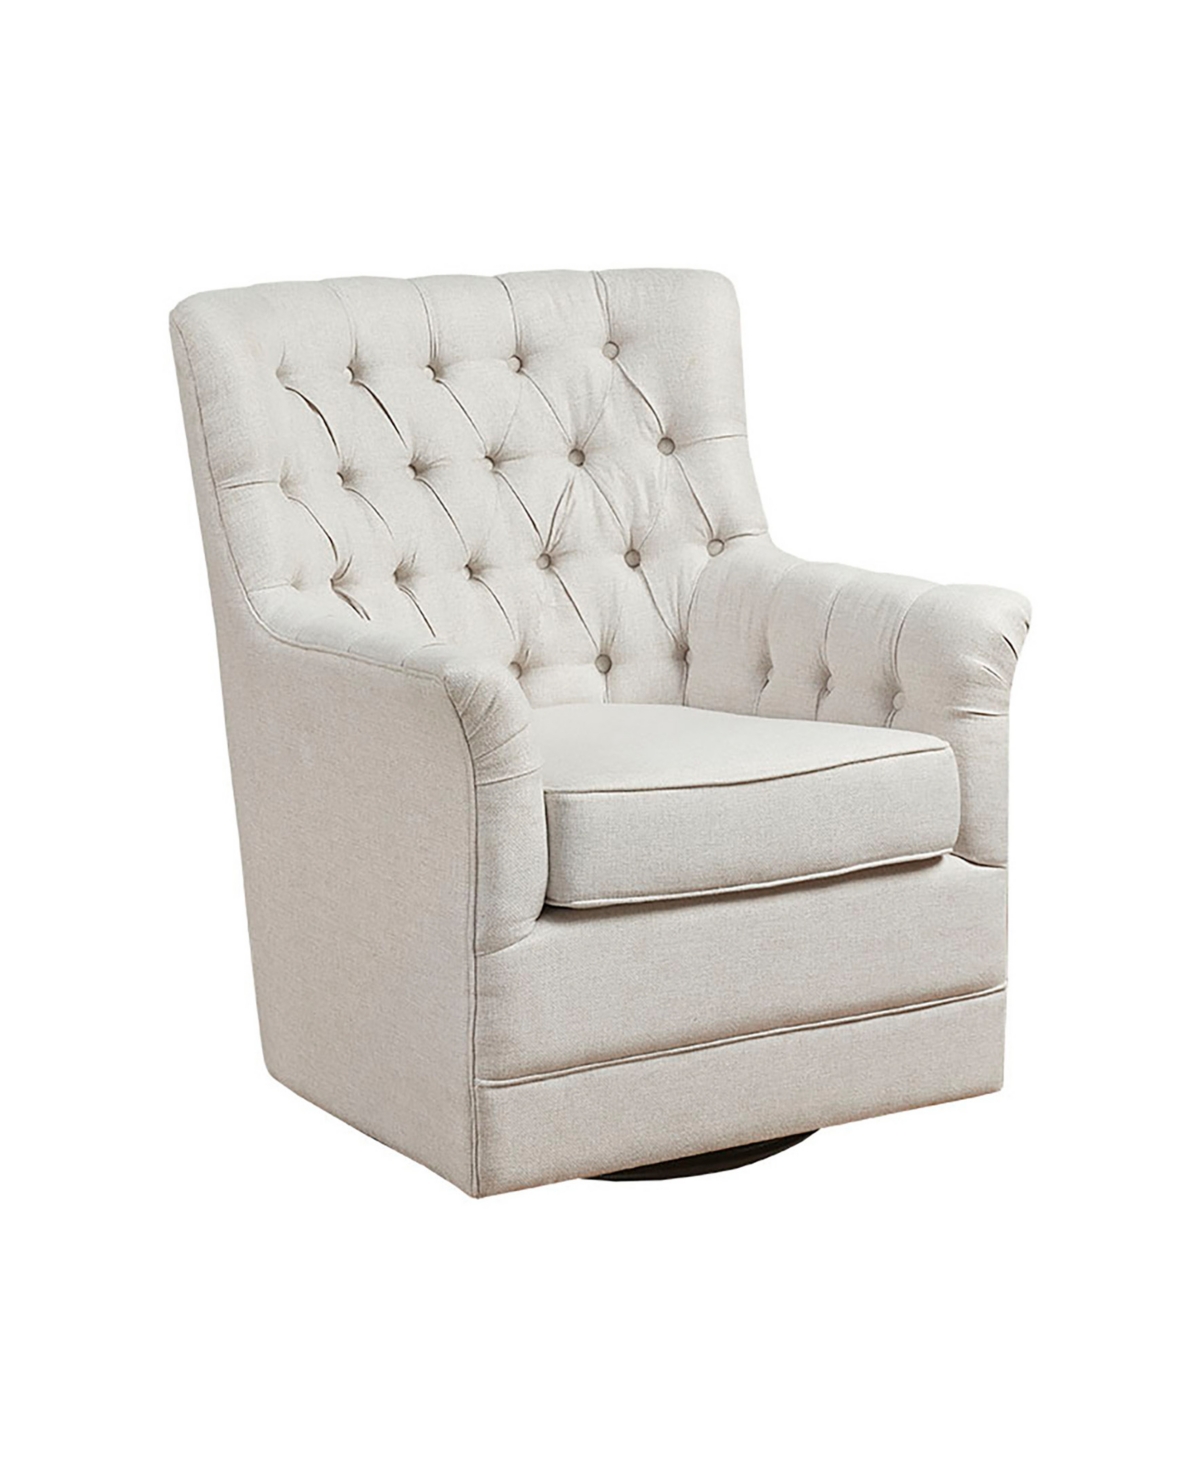 Madison Park Mathis 29.5" Fabric Swivel Glider Chair In Natural